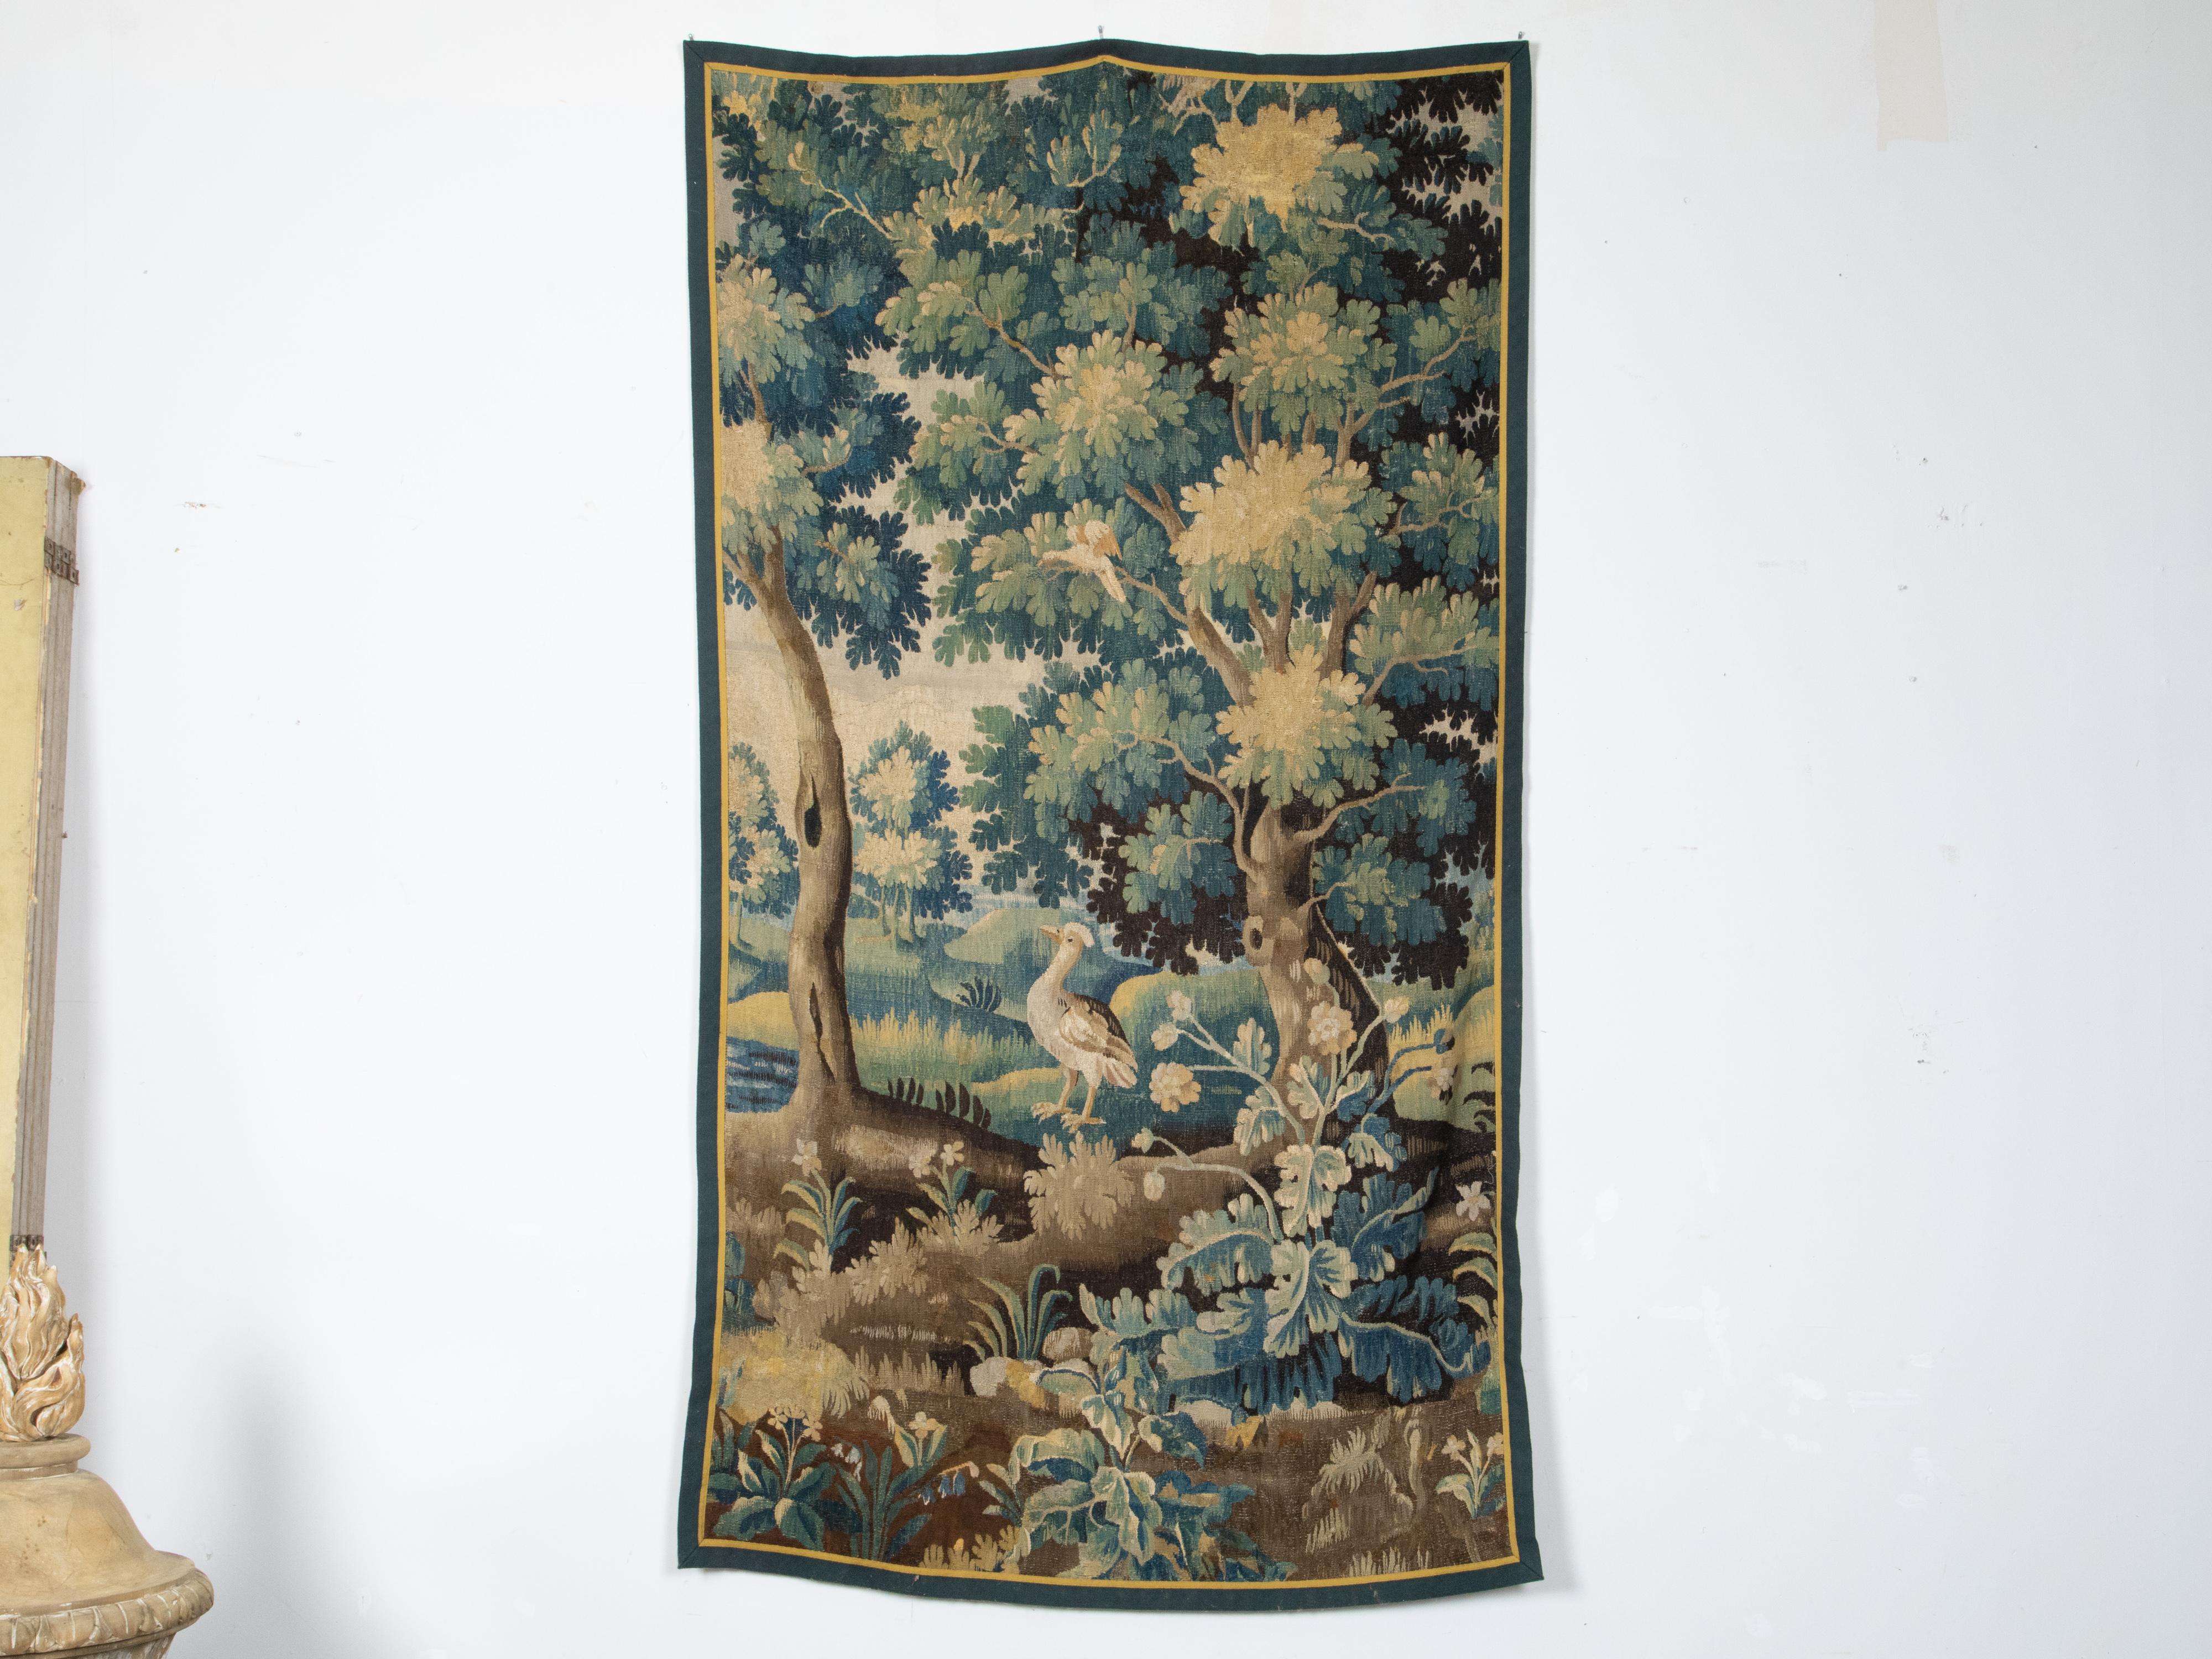 A French Royal Manufacture of Aubusson woven tapestry from the mid 18th century depicting a bird standing in luscious vegetation. Created during the Mid-18th Century in the Aubusson manufactures located in central France, this vertical woven